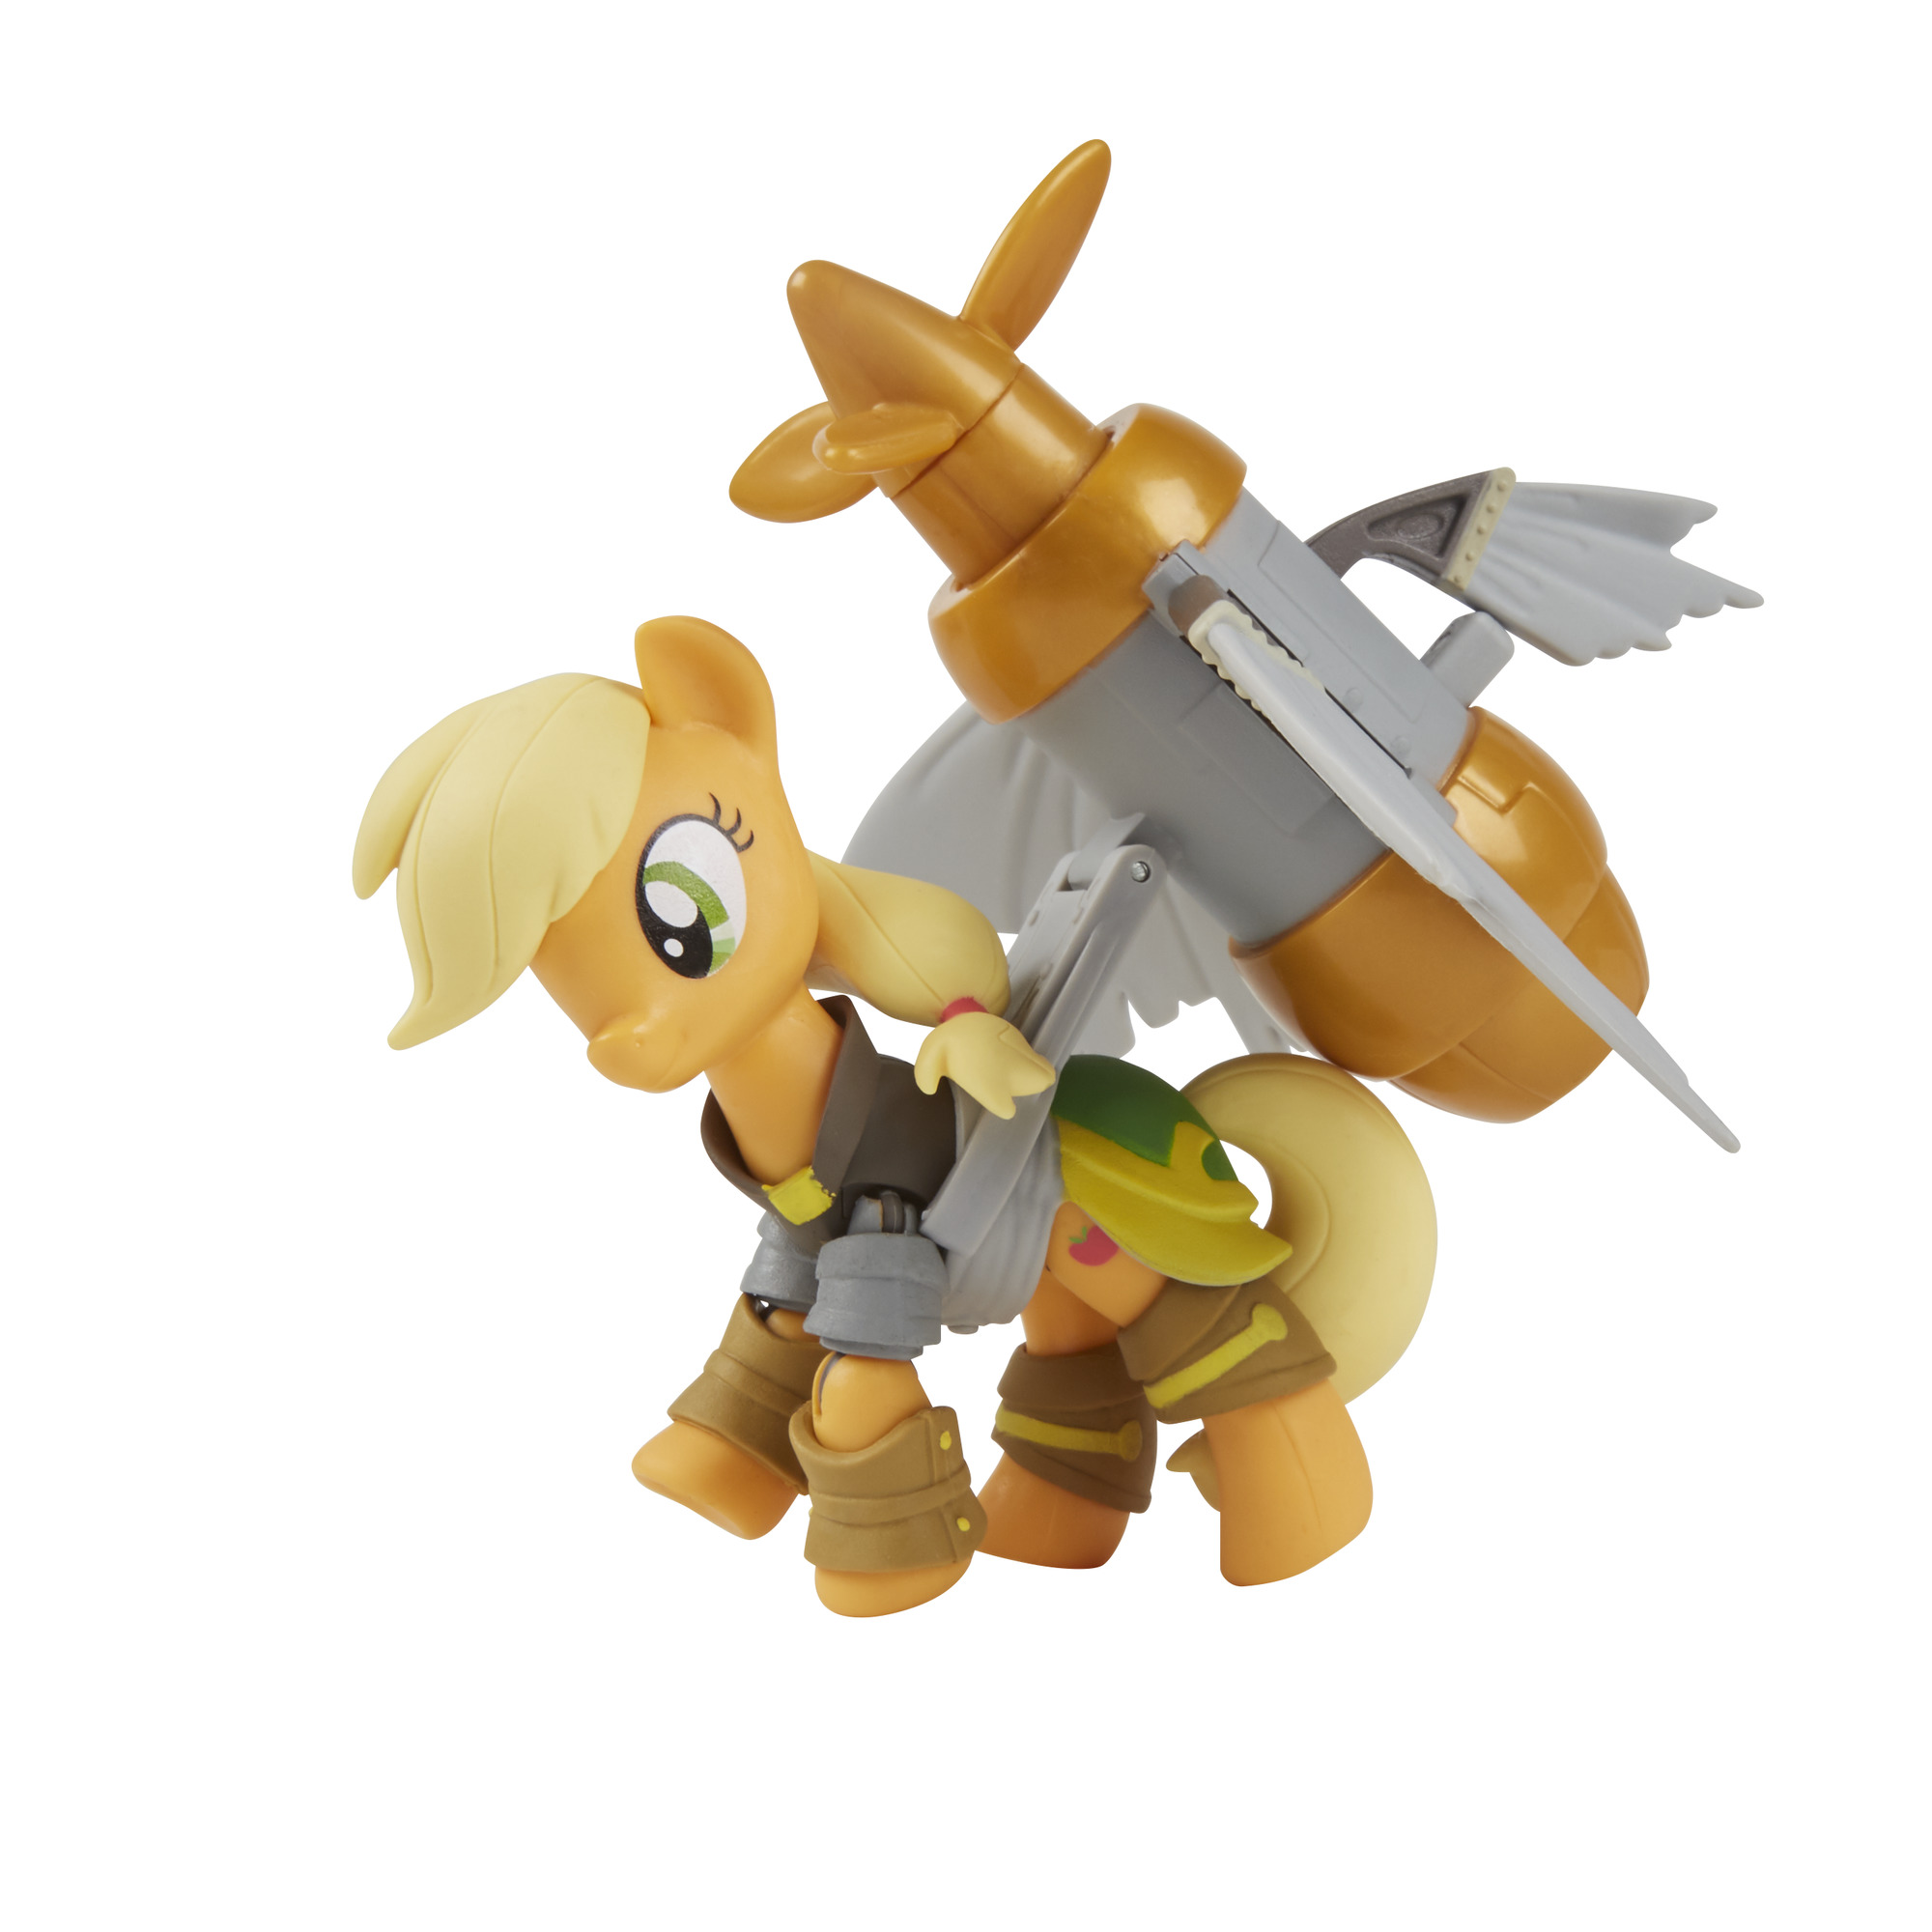 My Little Pony Movie Guardians of Harmony Pirate Power Applejack, Ages 4 and up - image 4 of 7